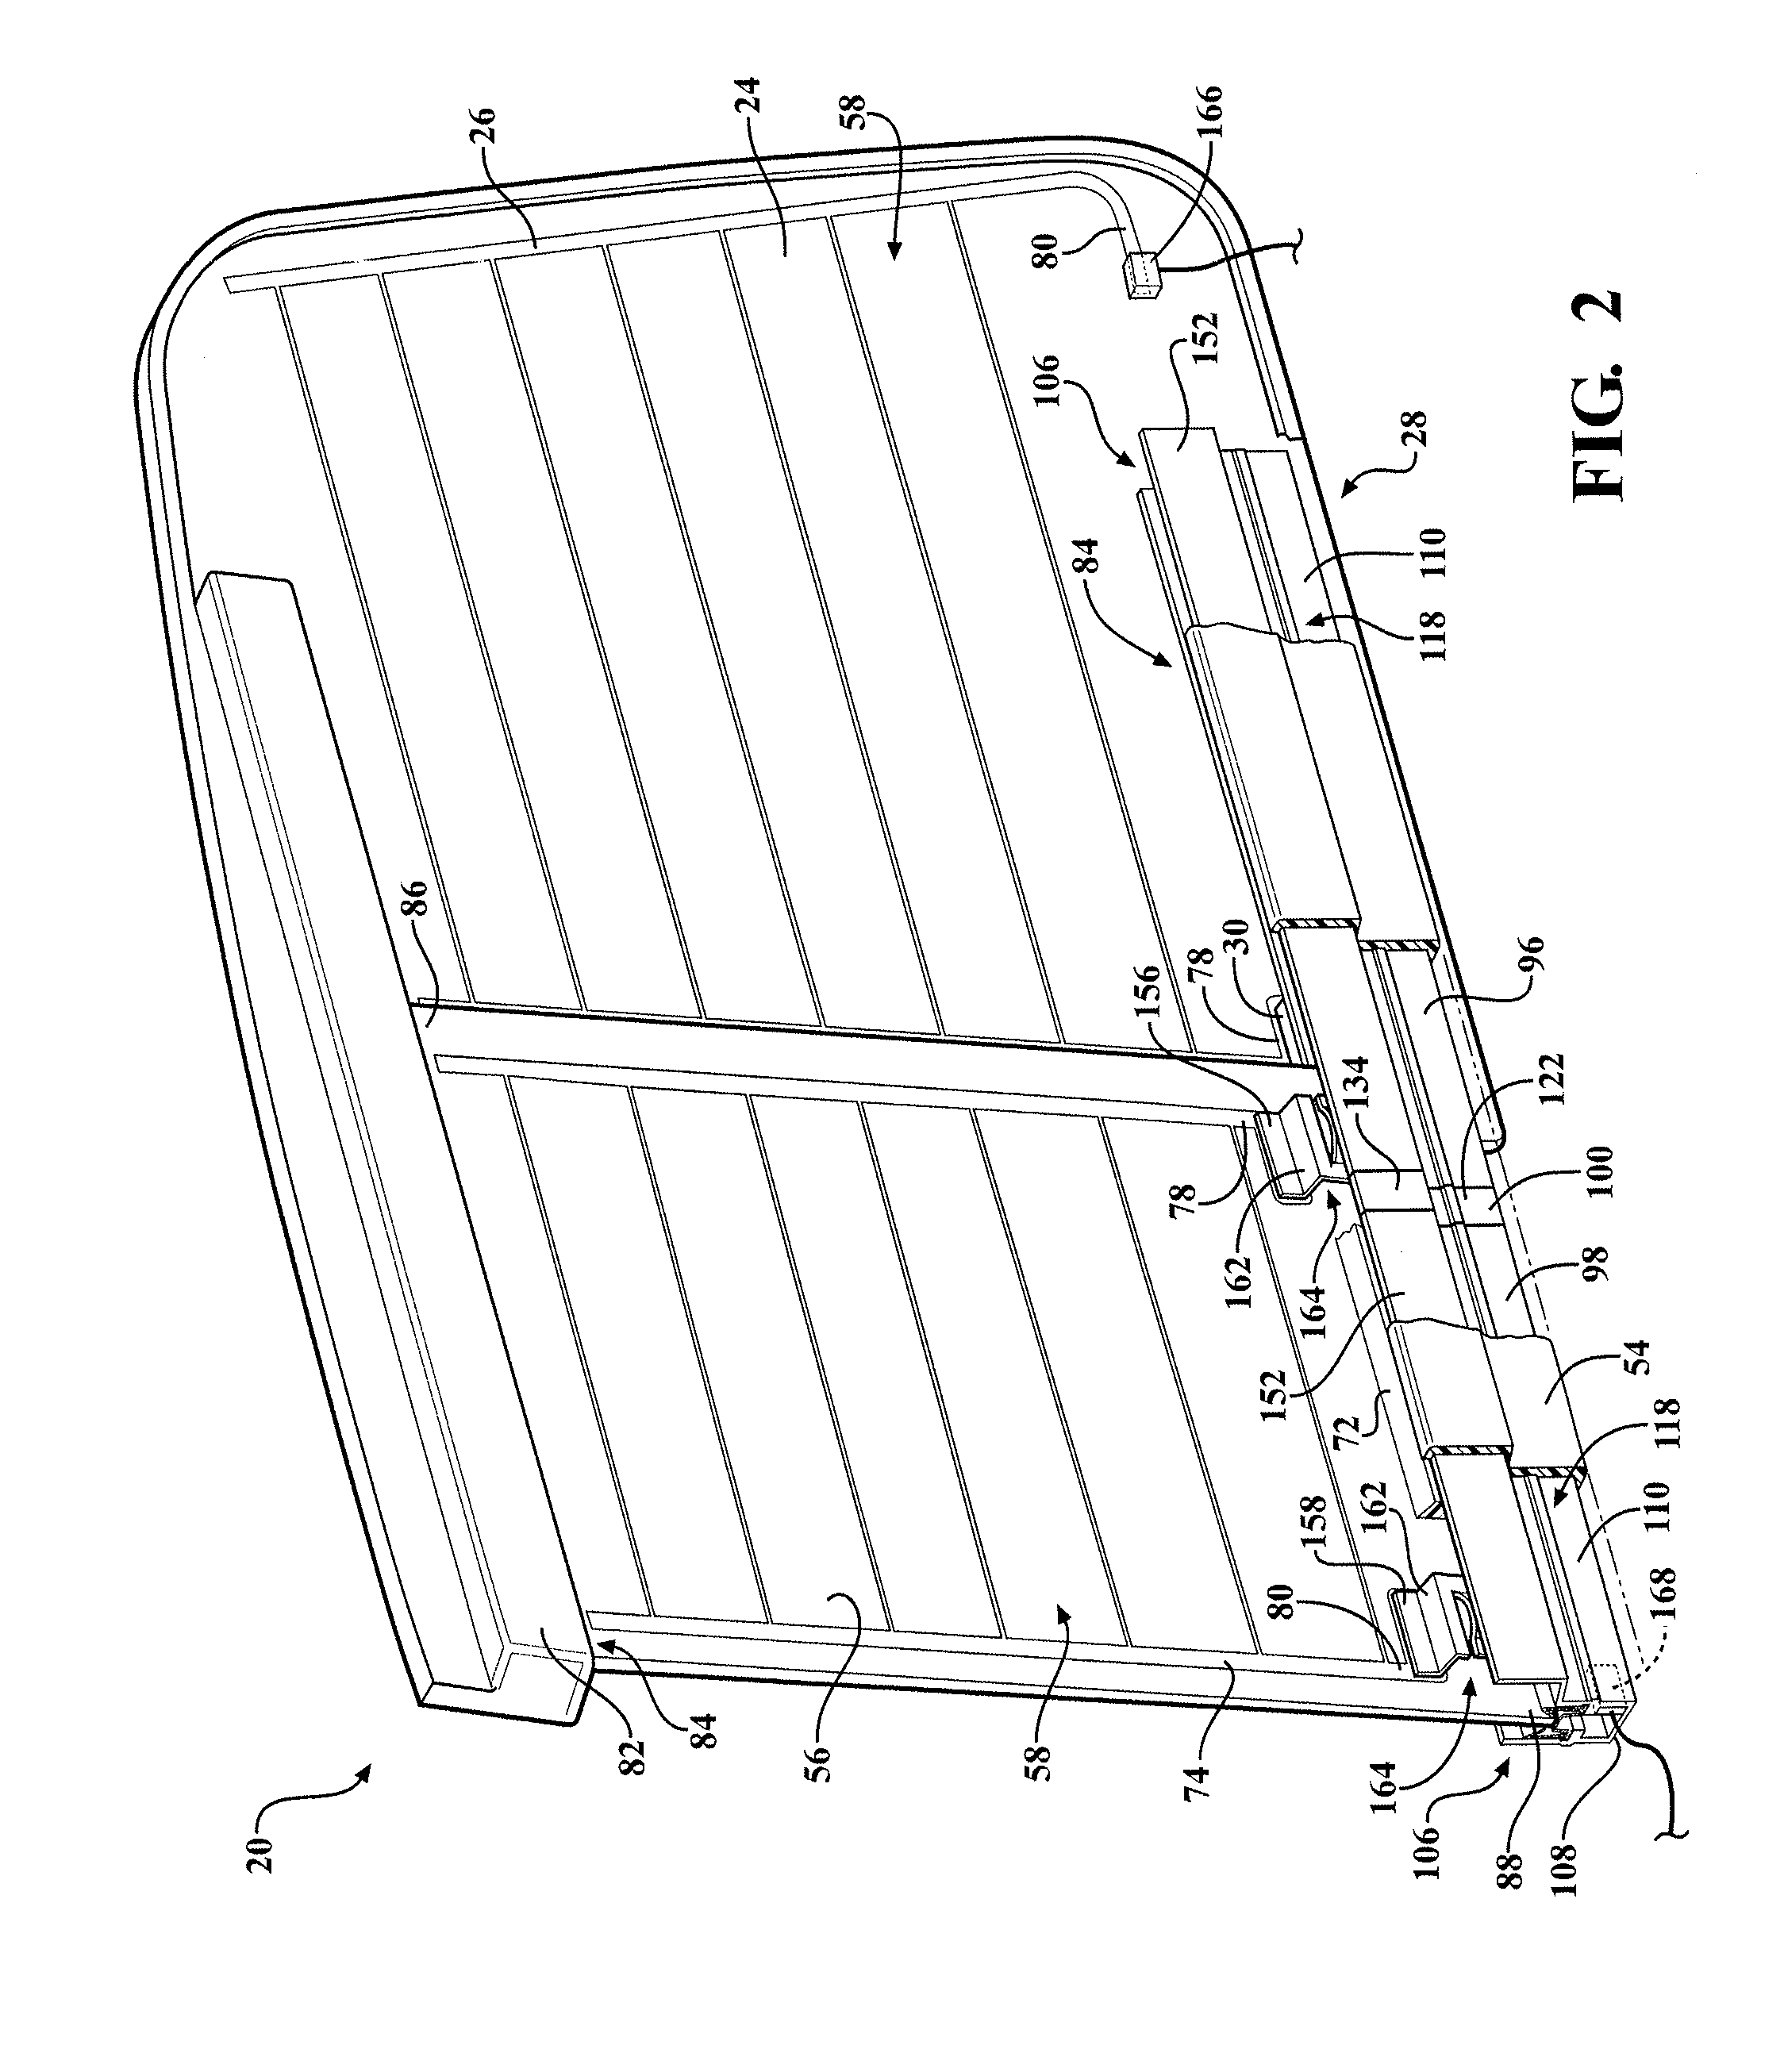 Sliding window assembly for a vehicle